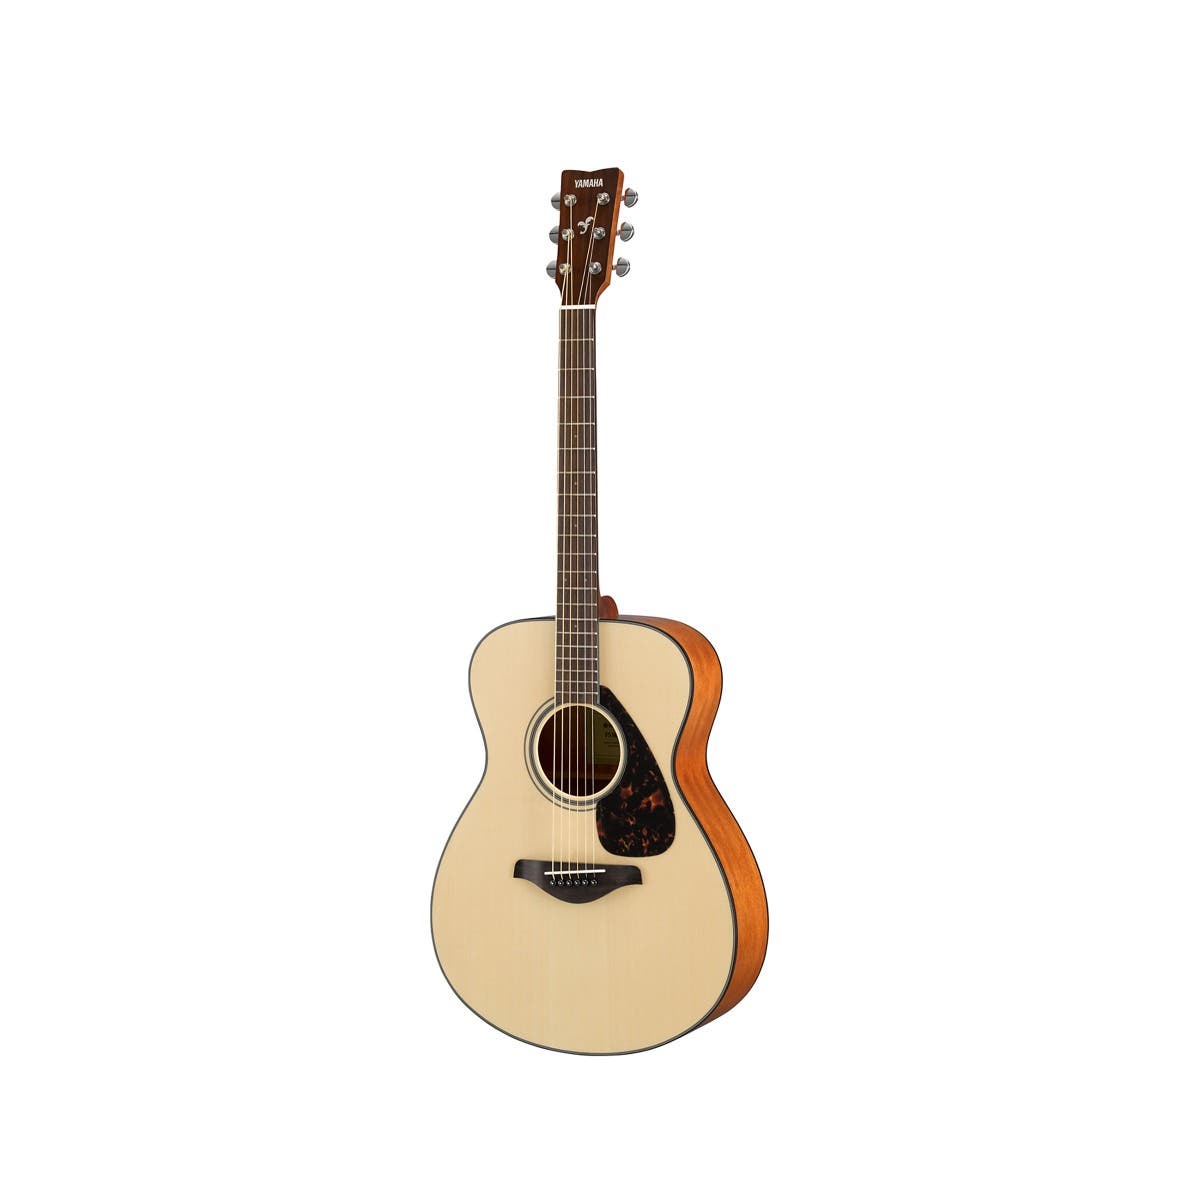 Yamaha FS800 Small Body Solid-Top Acoustic Guitar